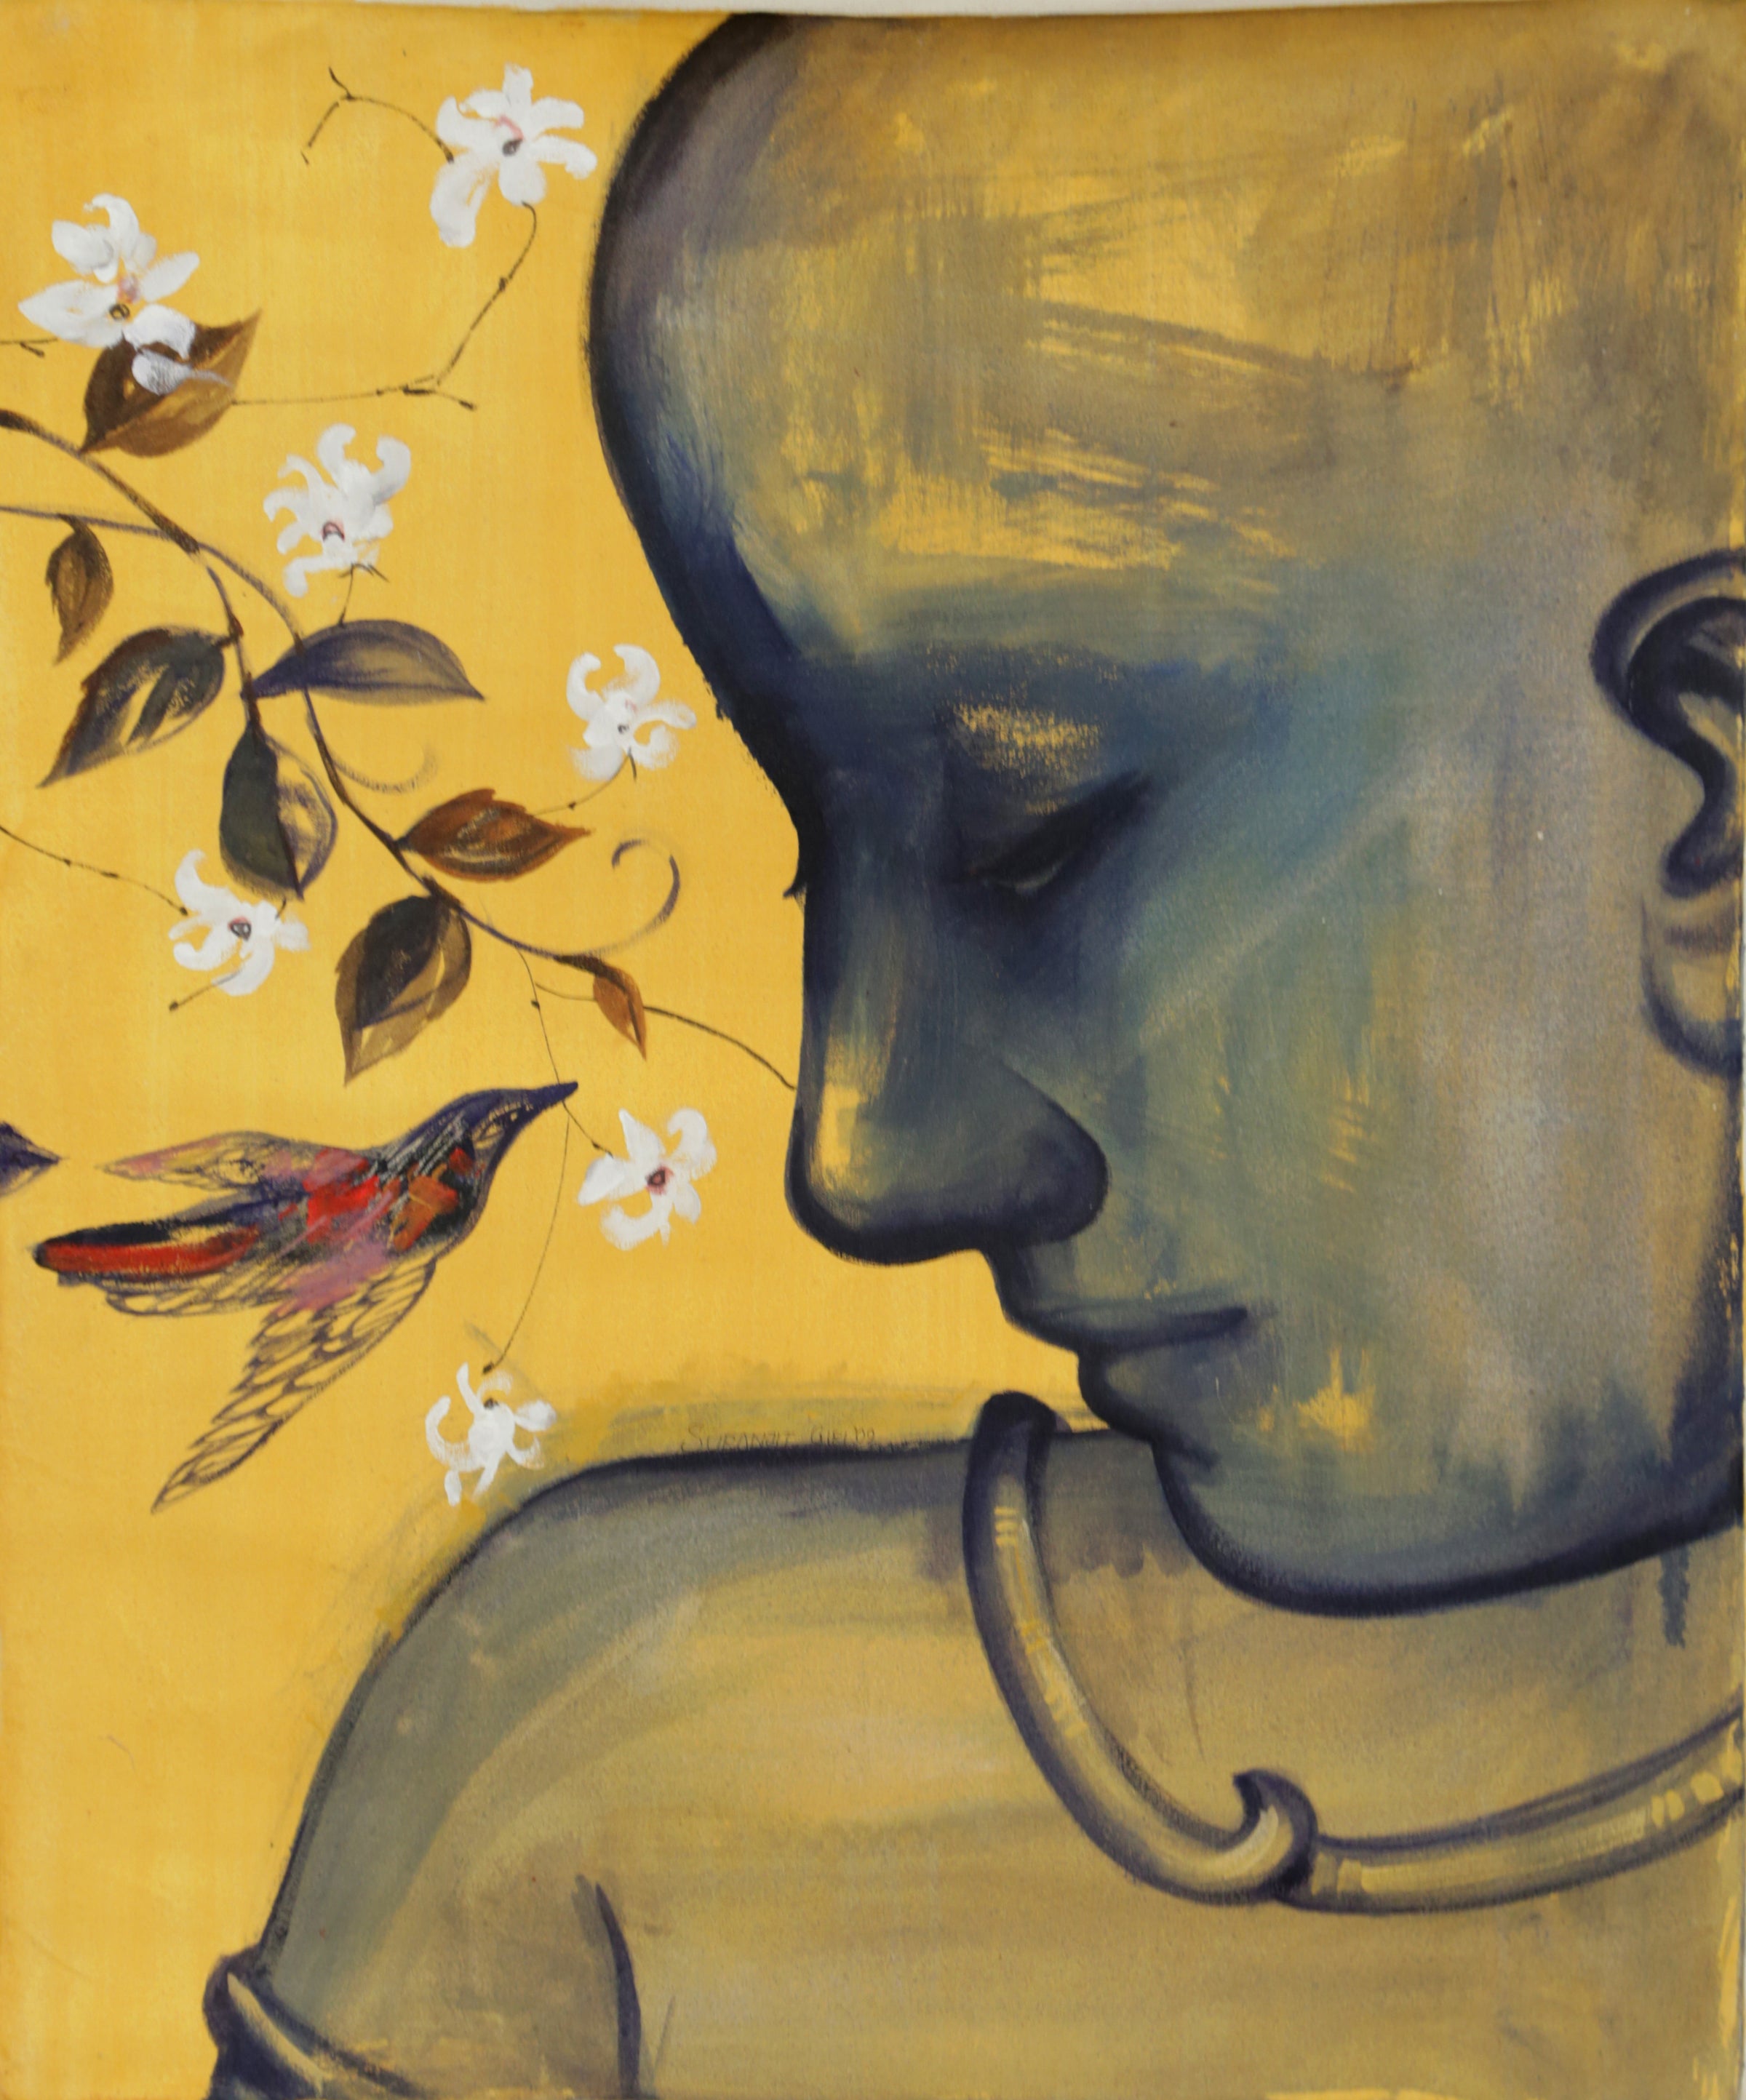 DREAMING by Suranjit Giri | Oil painting on Canvas